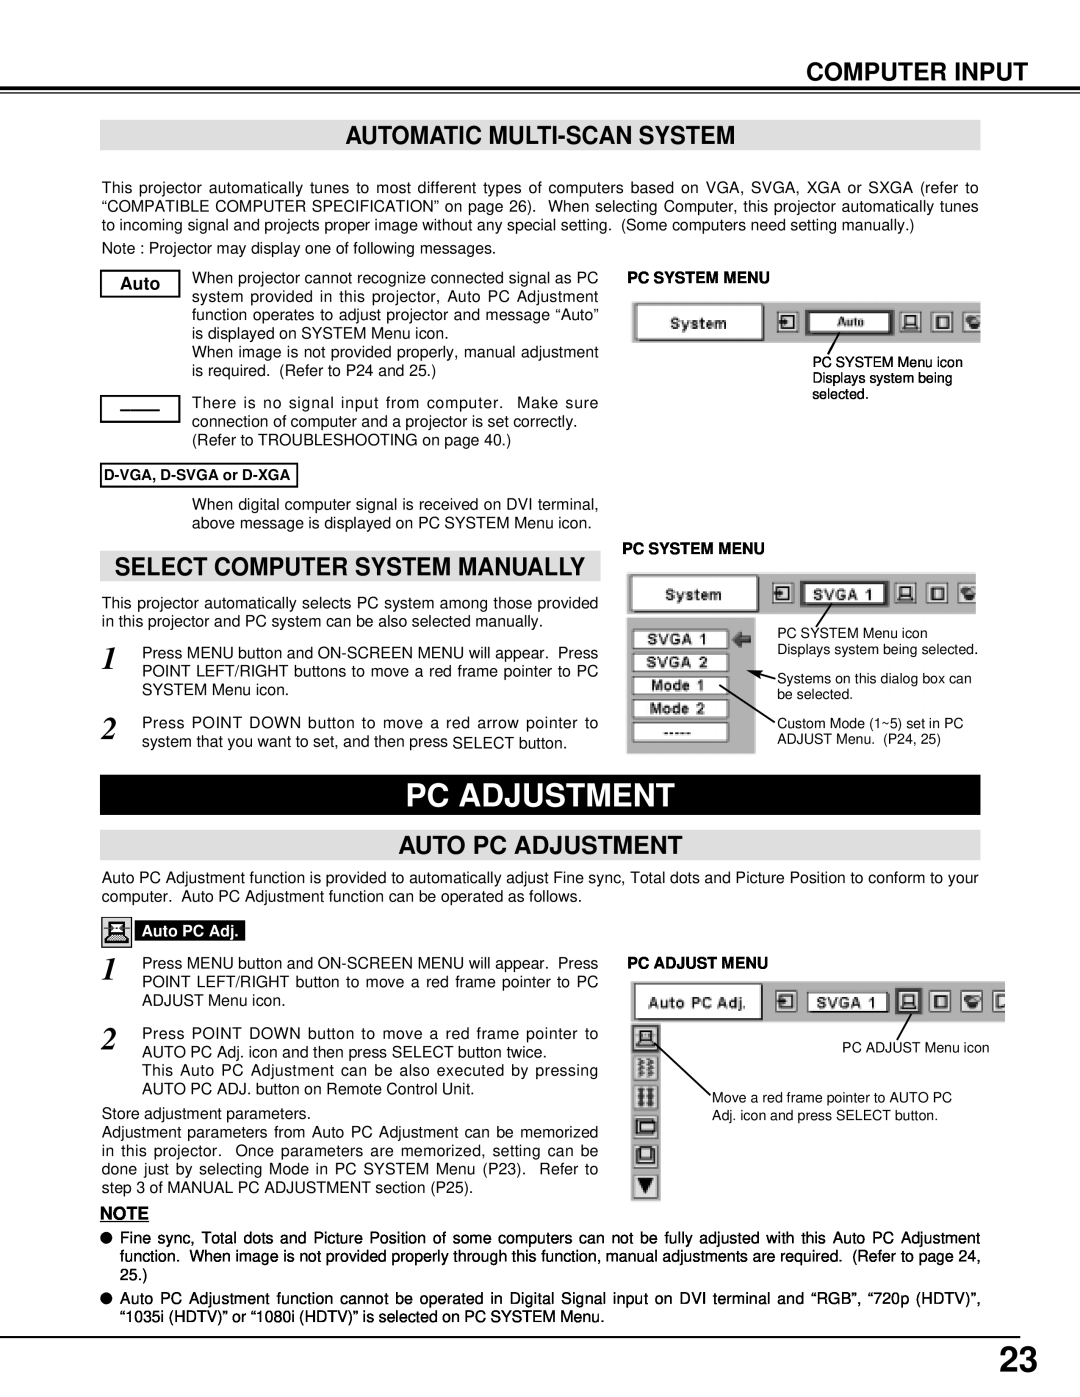 Eiki LC-X986 Computer Input Automatic Multi-Scansystem, Auto Pc Adjustment, Select Computer System Manually 